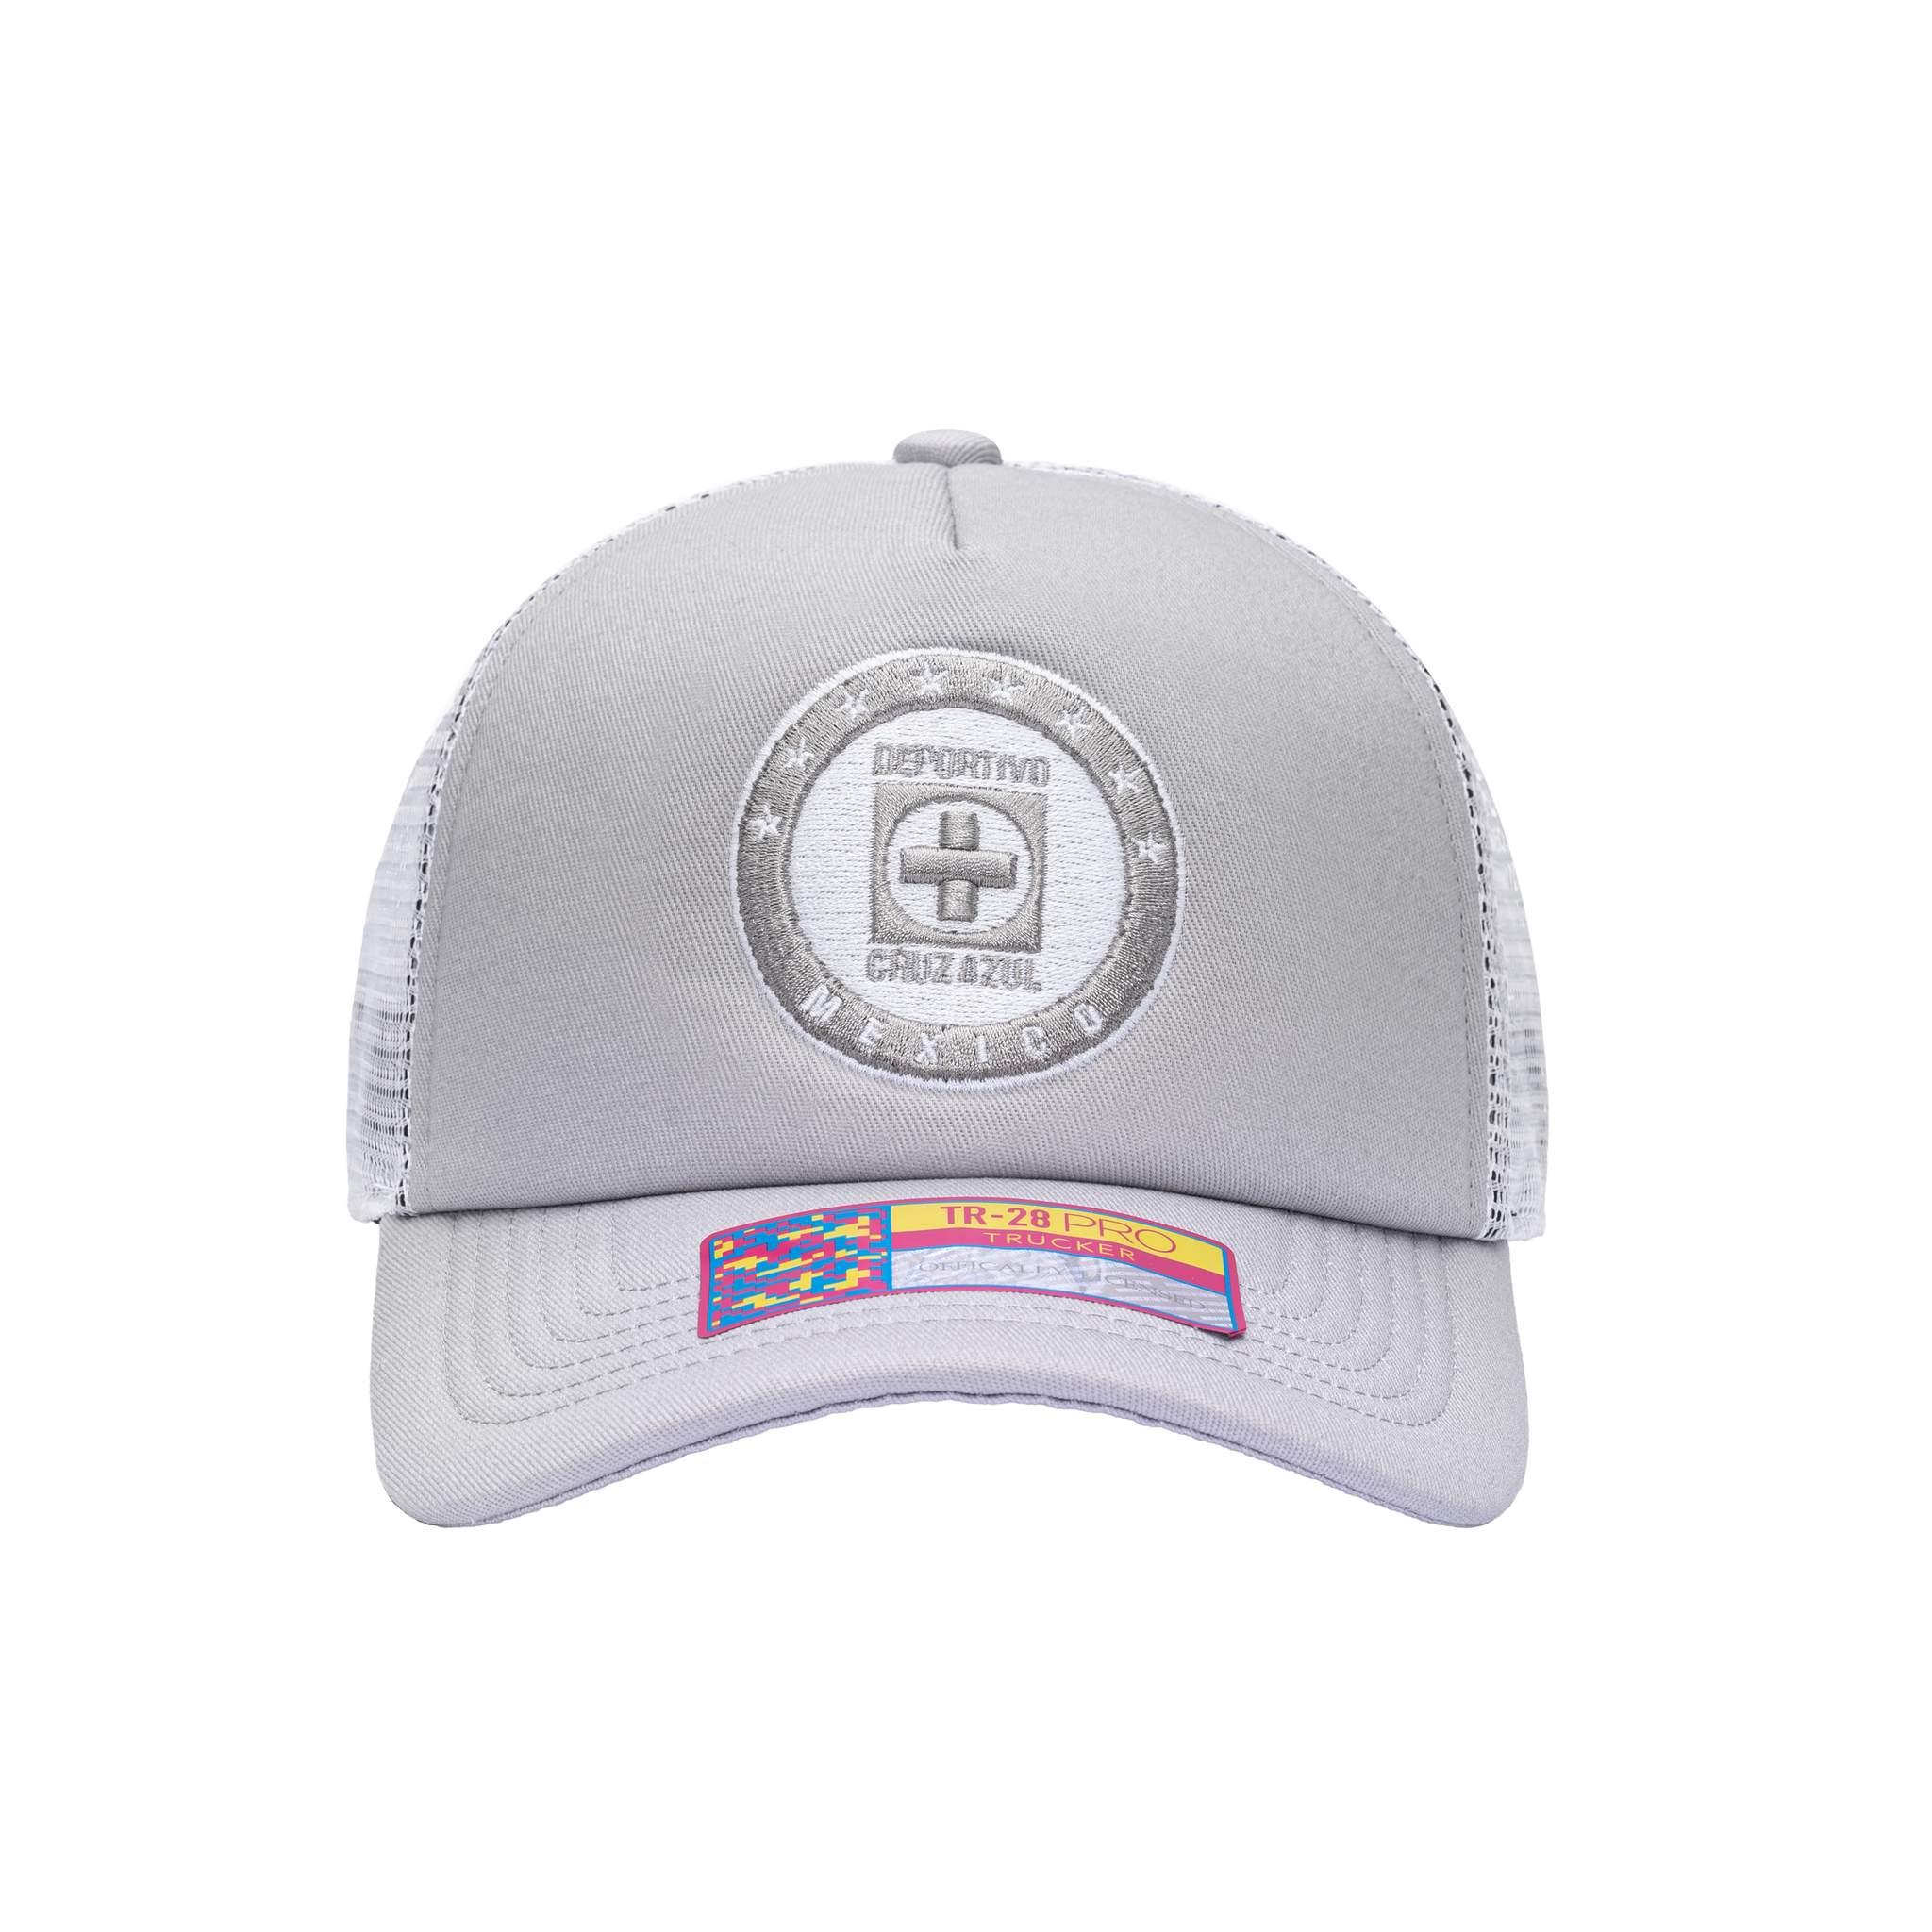 Front view of the Cruz Azul Fog Trucker Hat in Grey/White, with high crown, curved peak, mesh back and snapback closure.